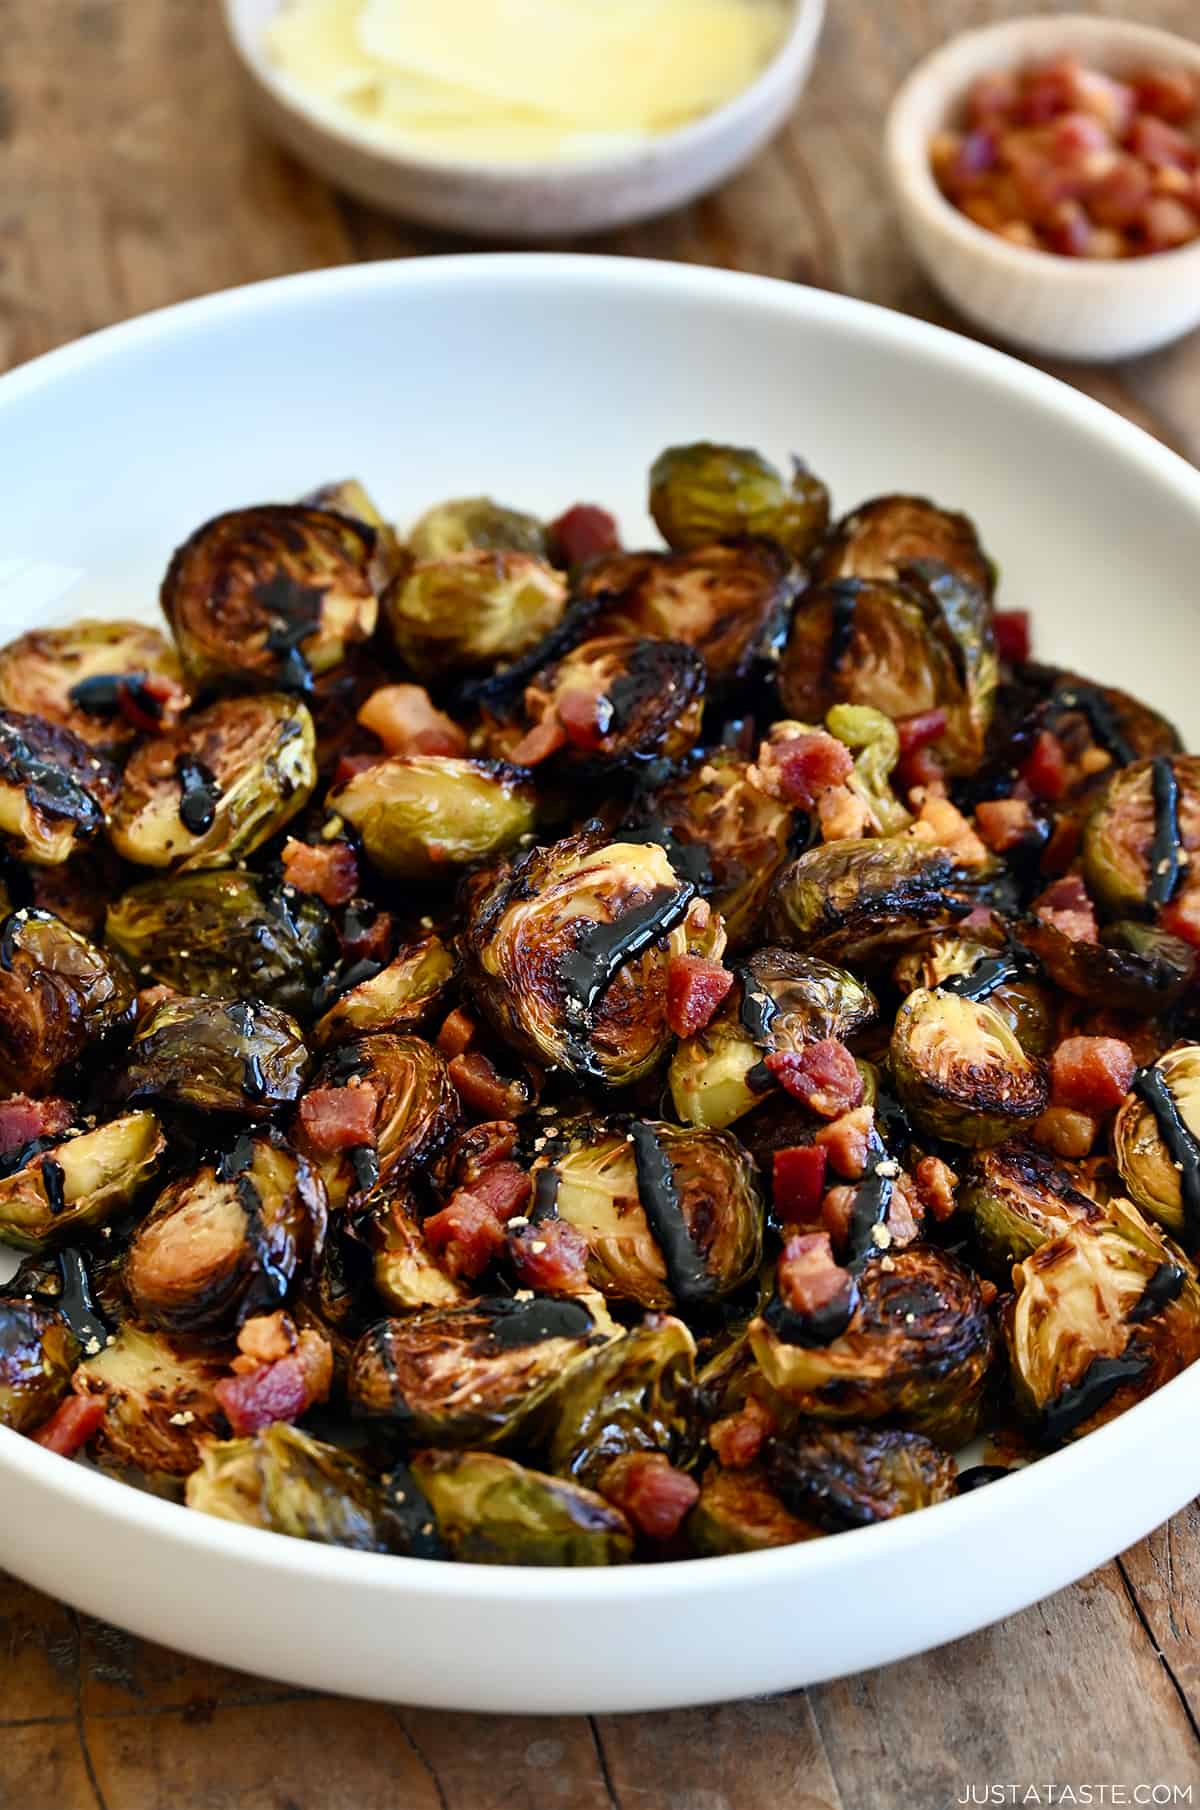 Roasted Brussels sprouts with pancetta bits all drizzled with thick balsamic syrup in a white serving bowl.